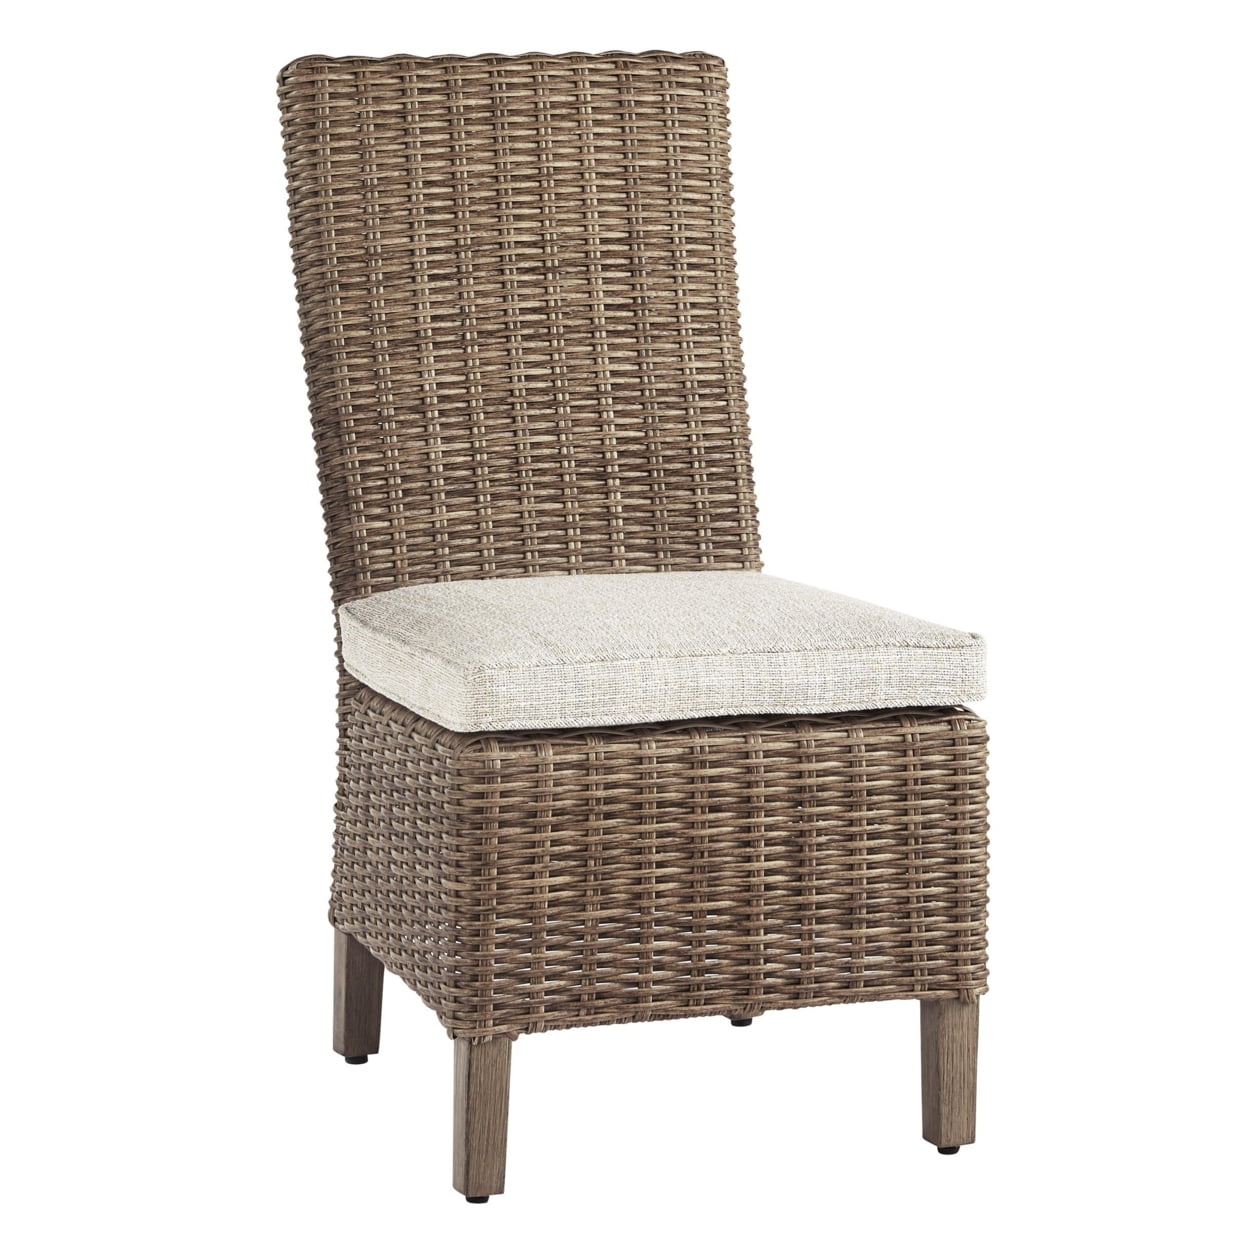 Picture of Benjara BM210660 Aluminum Frame Side Chair with Handwoven Wicker - Brown & Beige - 39.75 x 21 x 27 in. - Set of 2